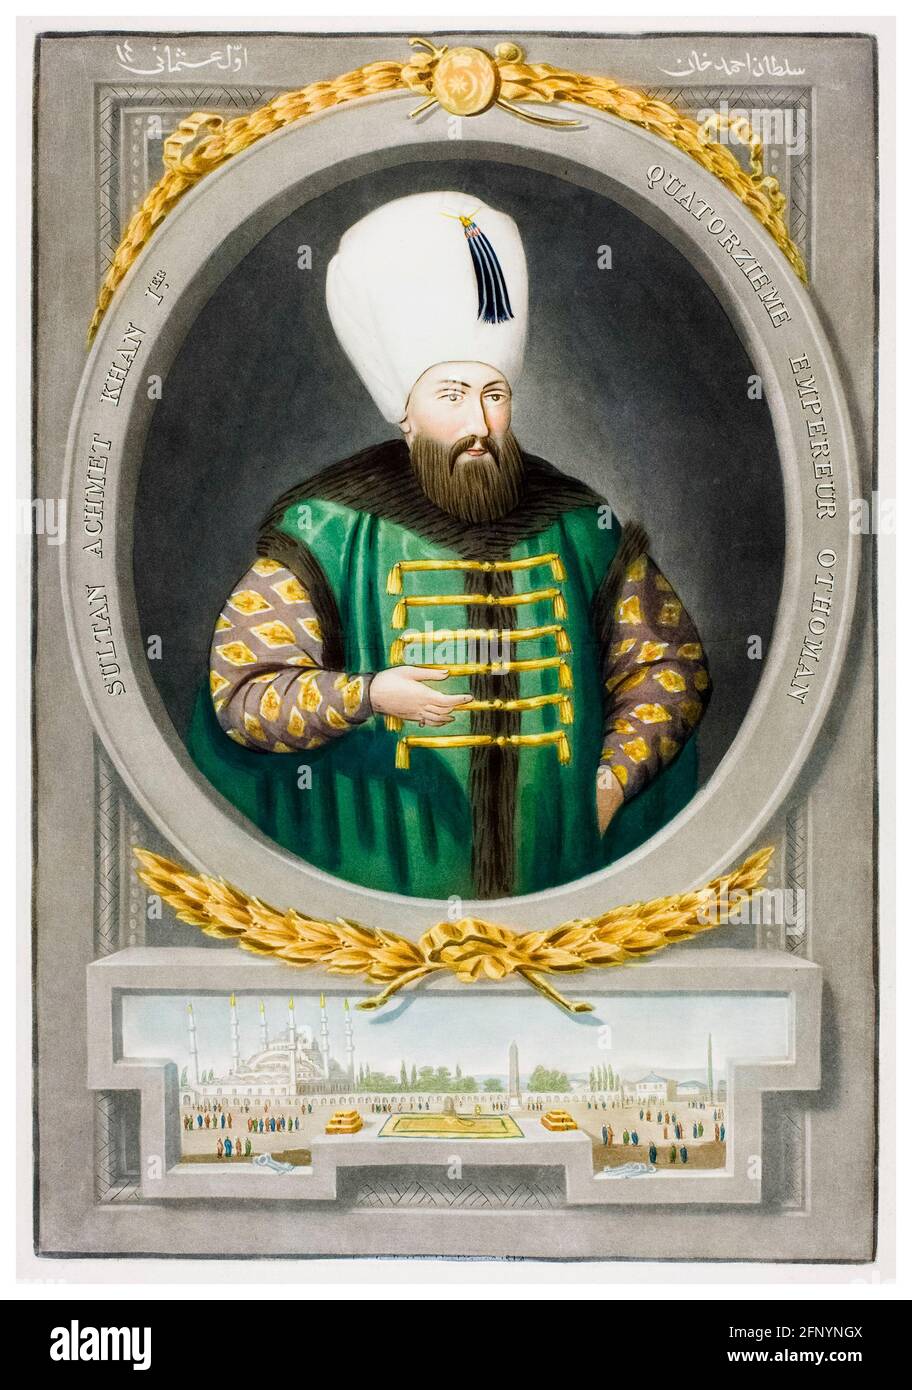 Ahmed I of Turkey (1590-1617), 14th Sultan of the Ottoman Empire (1603-1617), portrait engraving by John Young, 1815 Stock Photo